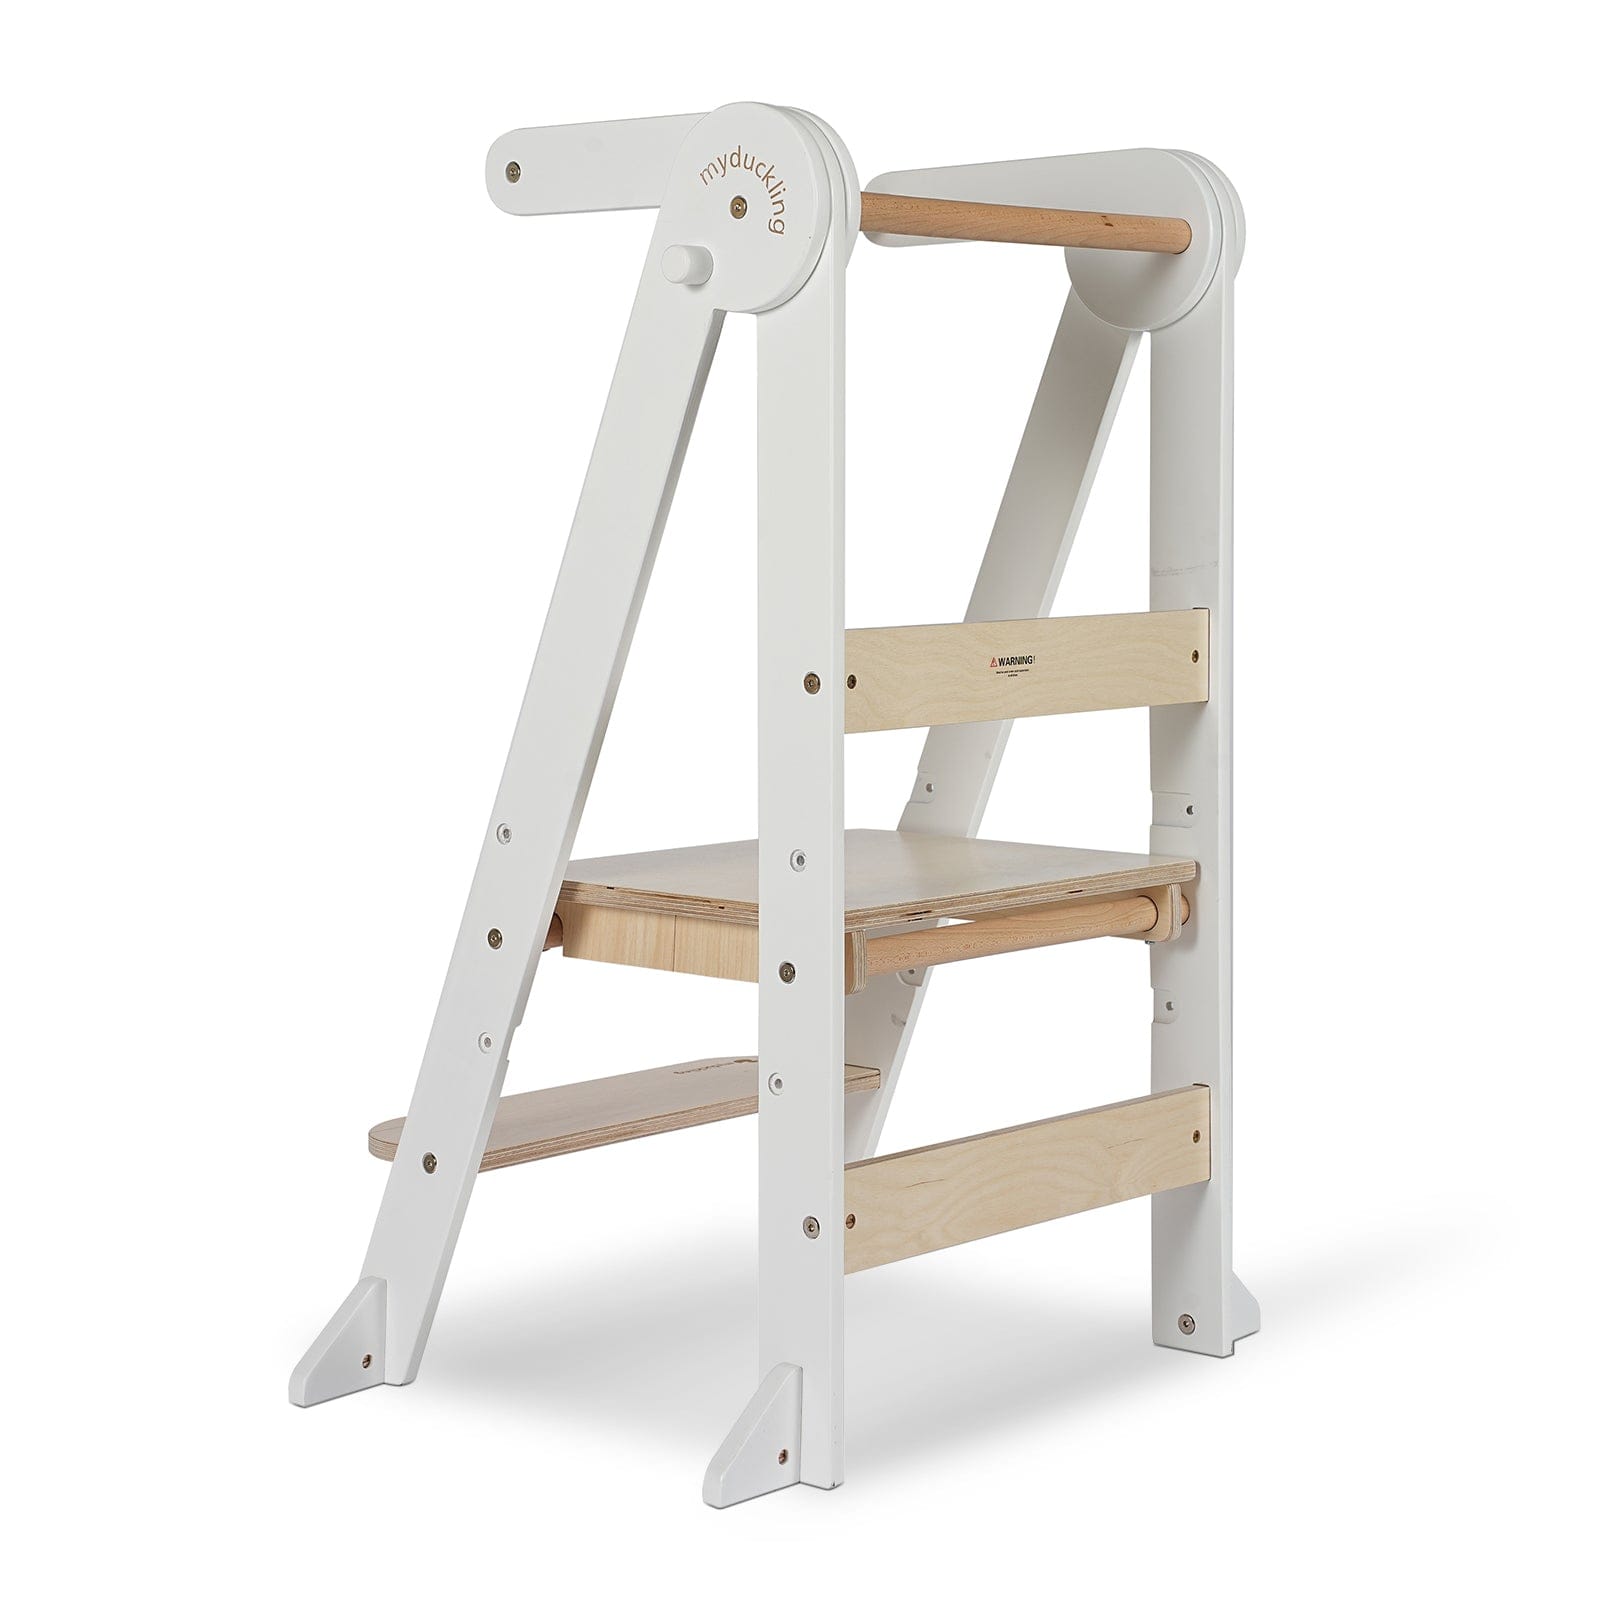 My Duckling MILA Deluxe Folding Adjustable Learning Tower - White/Natural